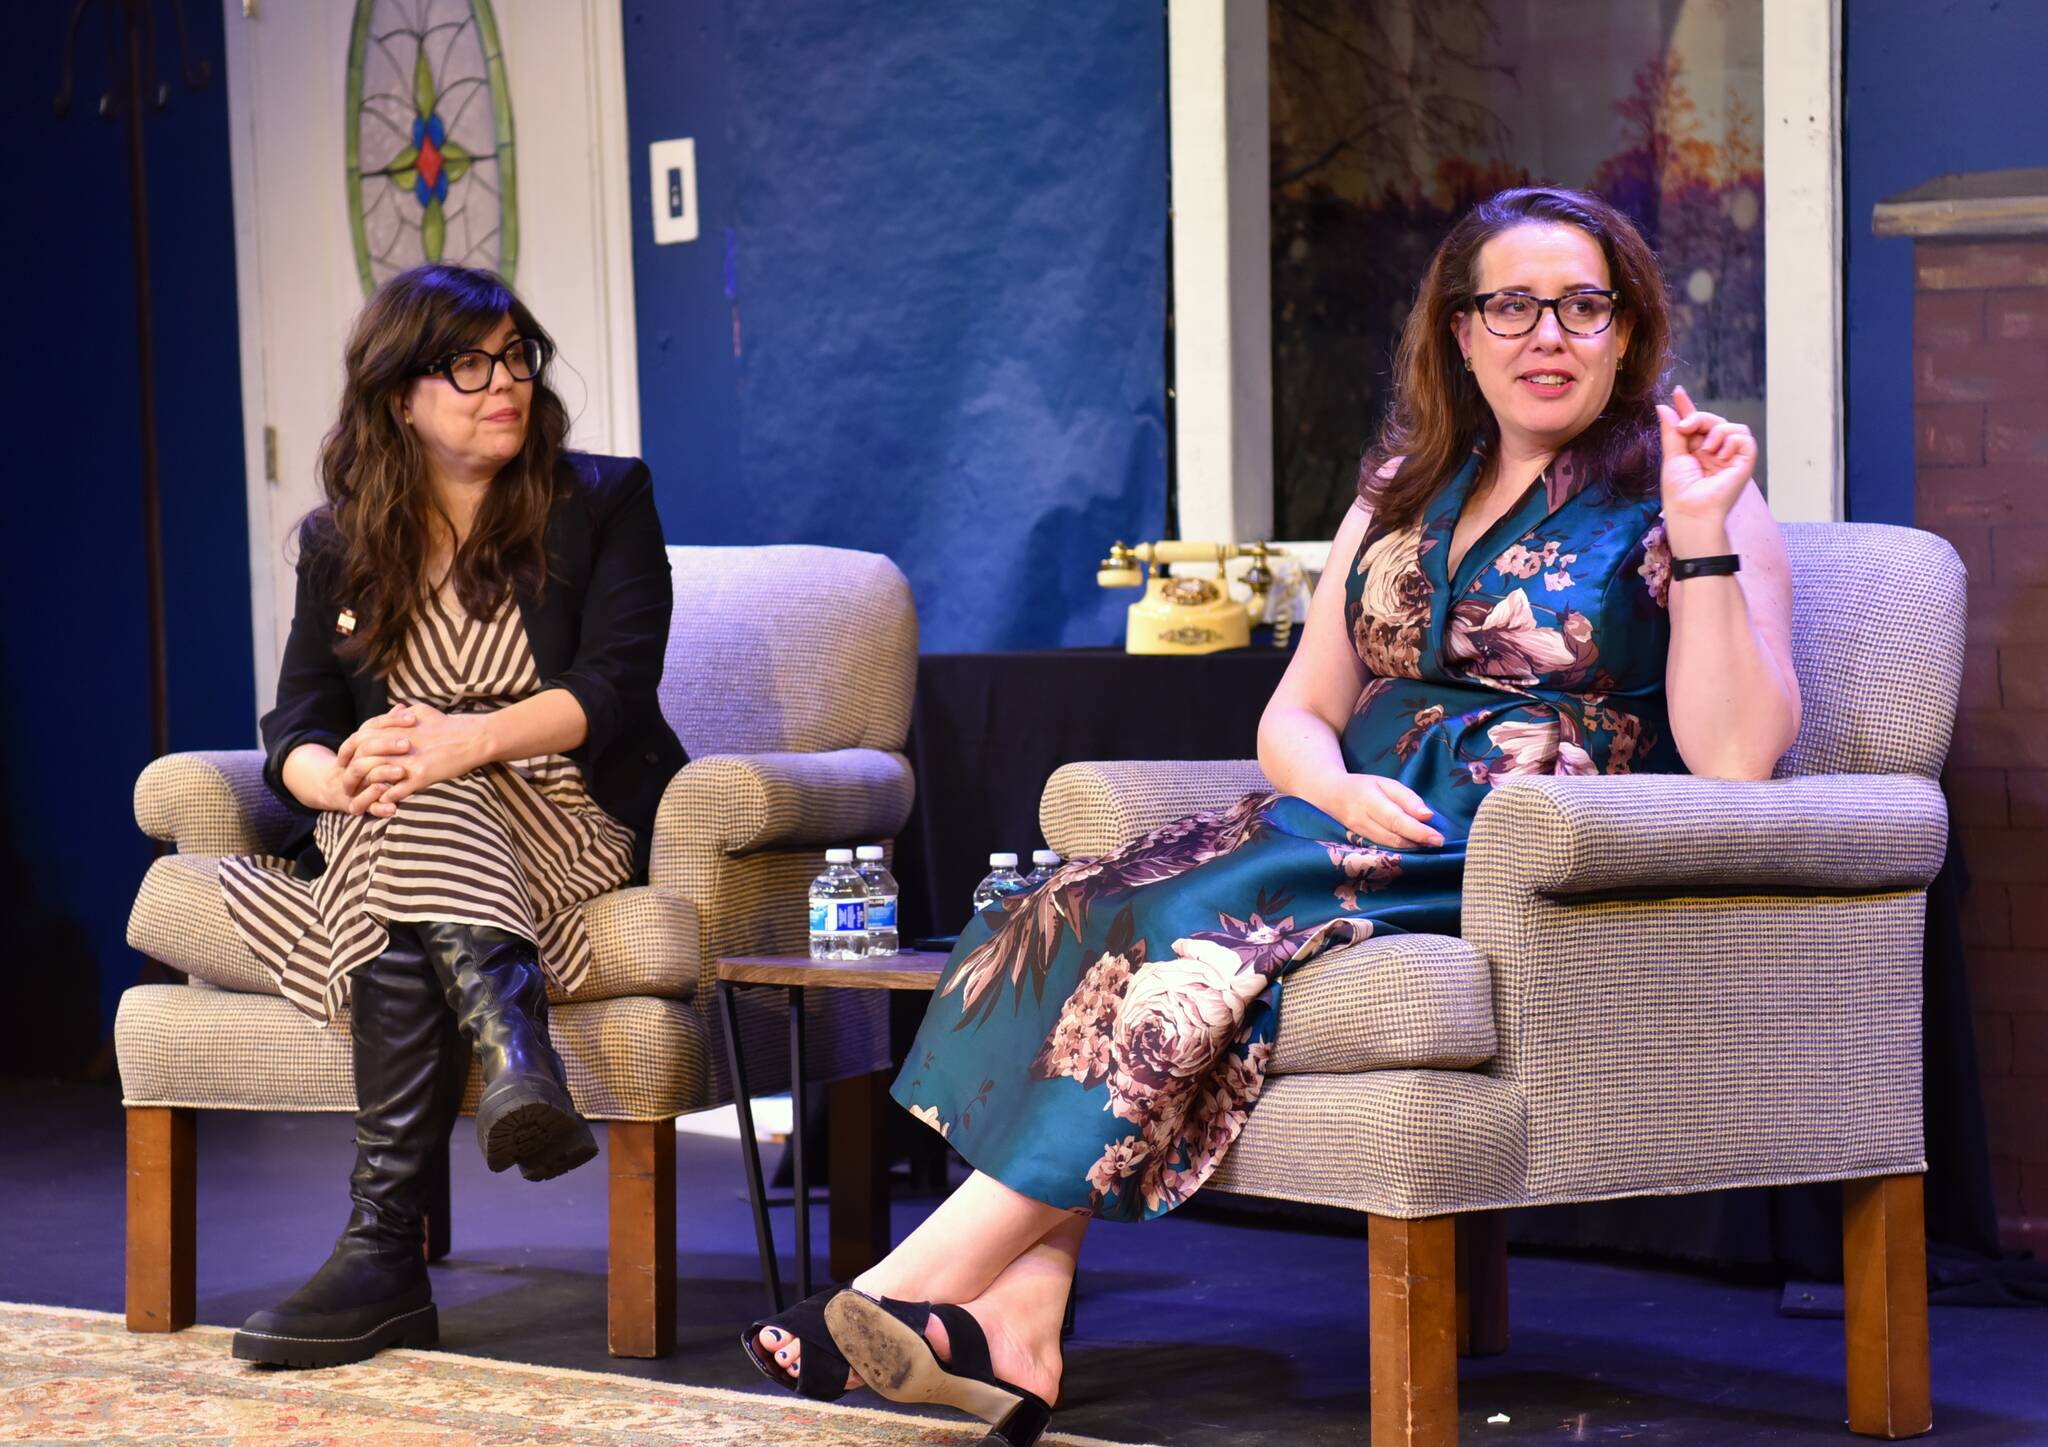 Martha Brockenbough interviews Julia Quinn, right, author of the Bridgerton book series, at the Jewelbox Theater in Poulsbo.